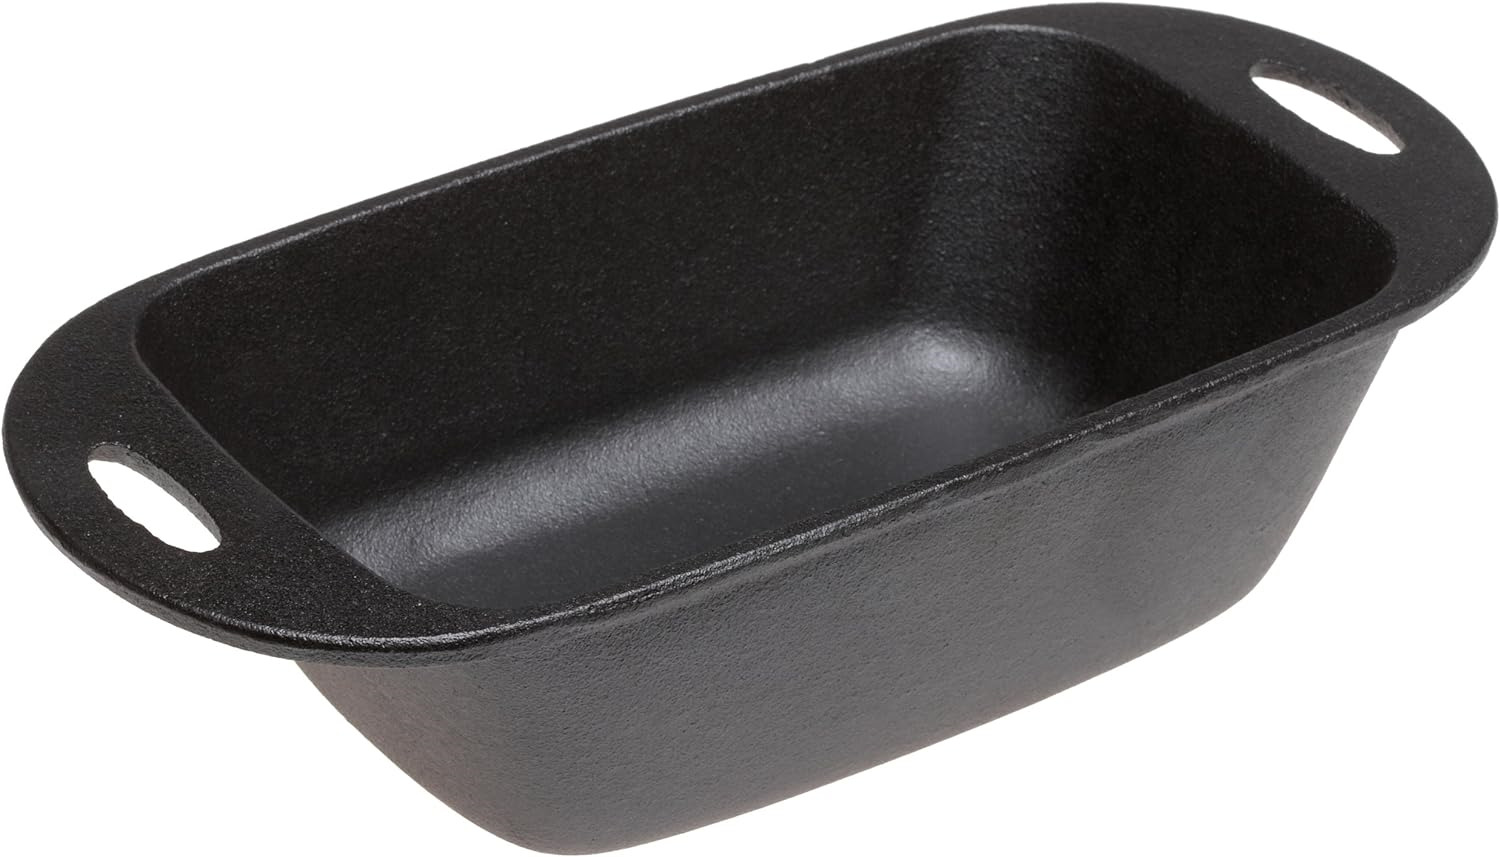 Loaf Pan - Pre-Seasoned Cast Iron 11-3/4 inches By Old Mountain